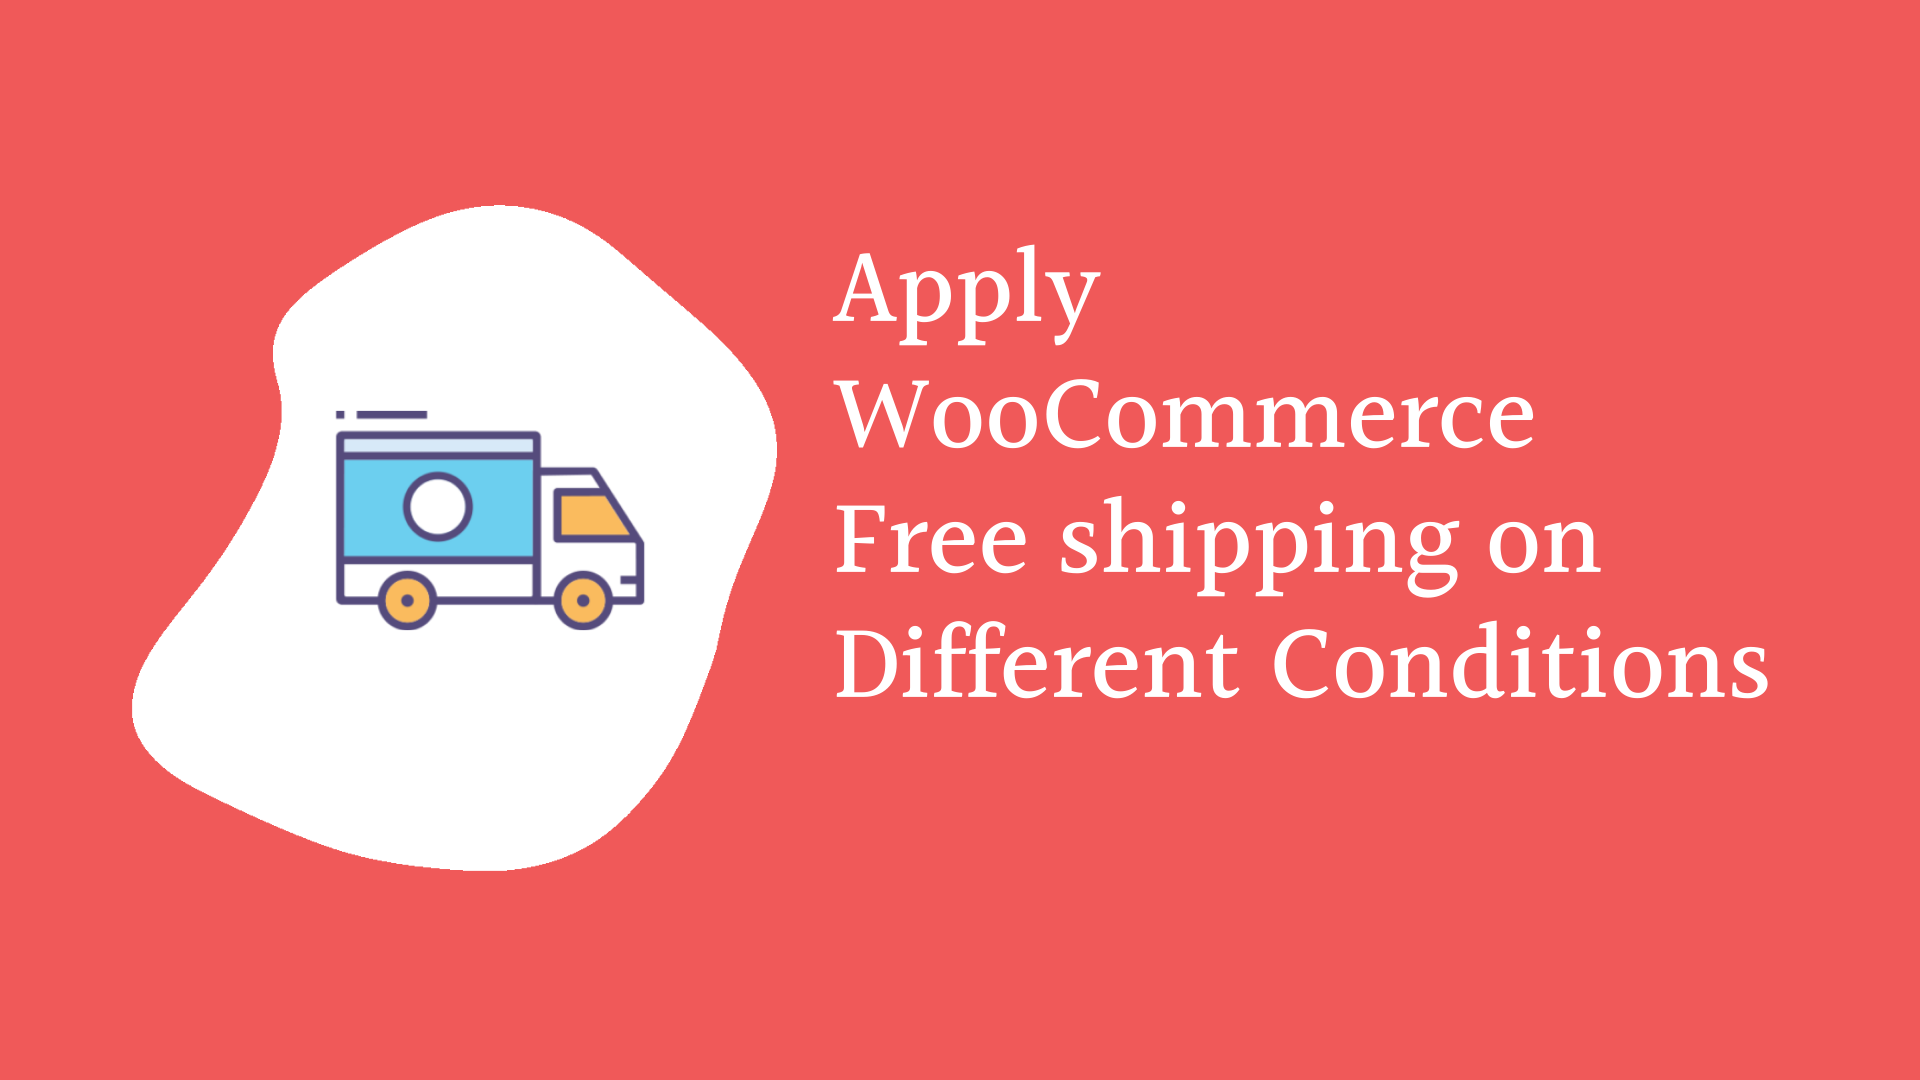 Apply WooCommerce free shipping for different Conditions